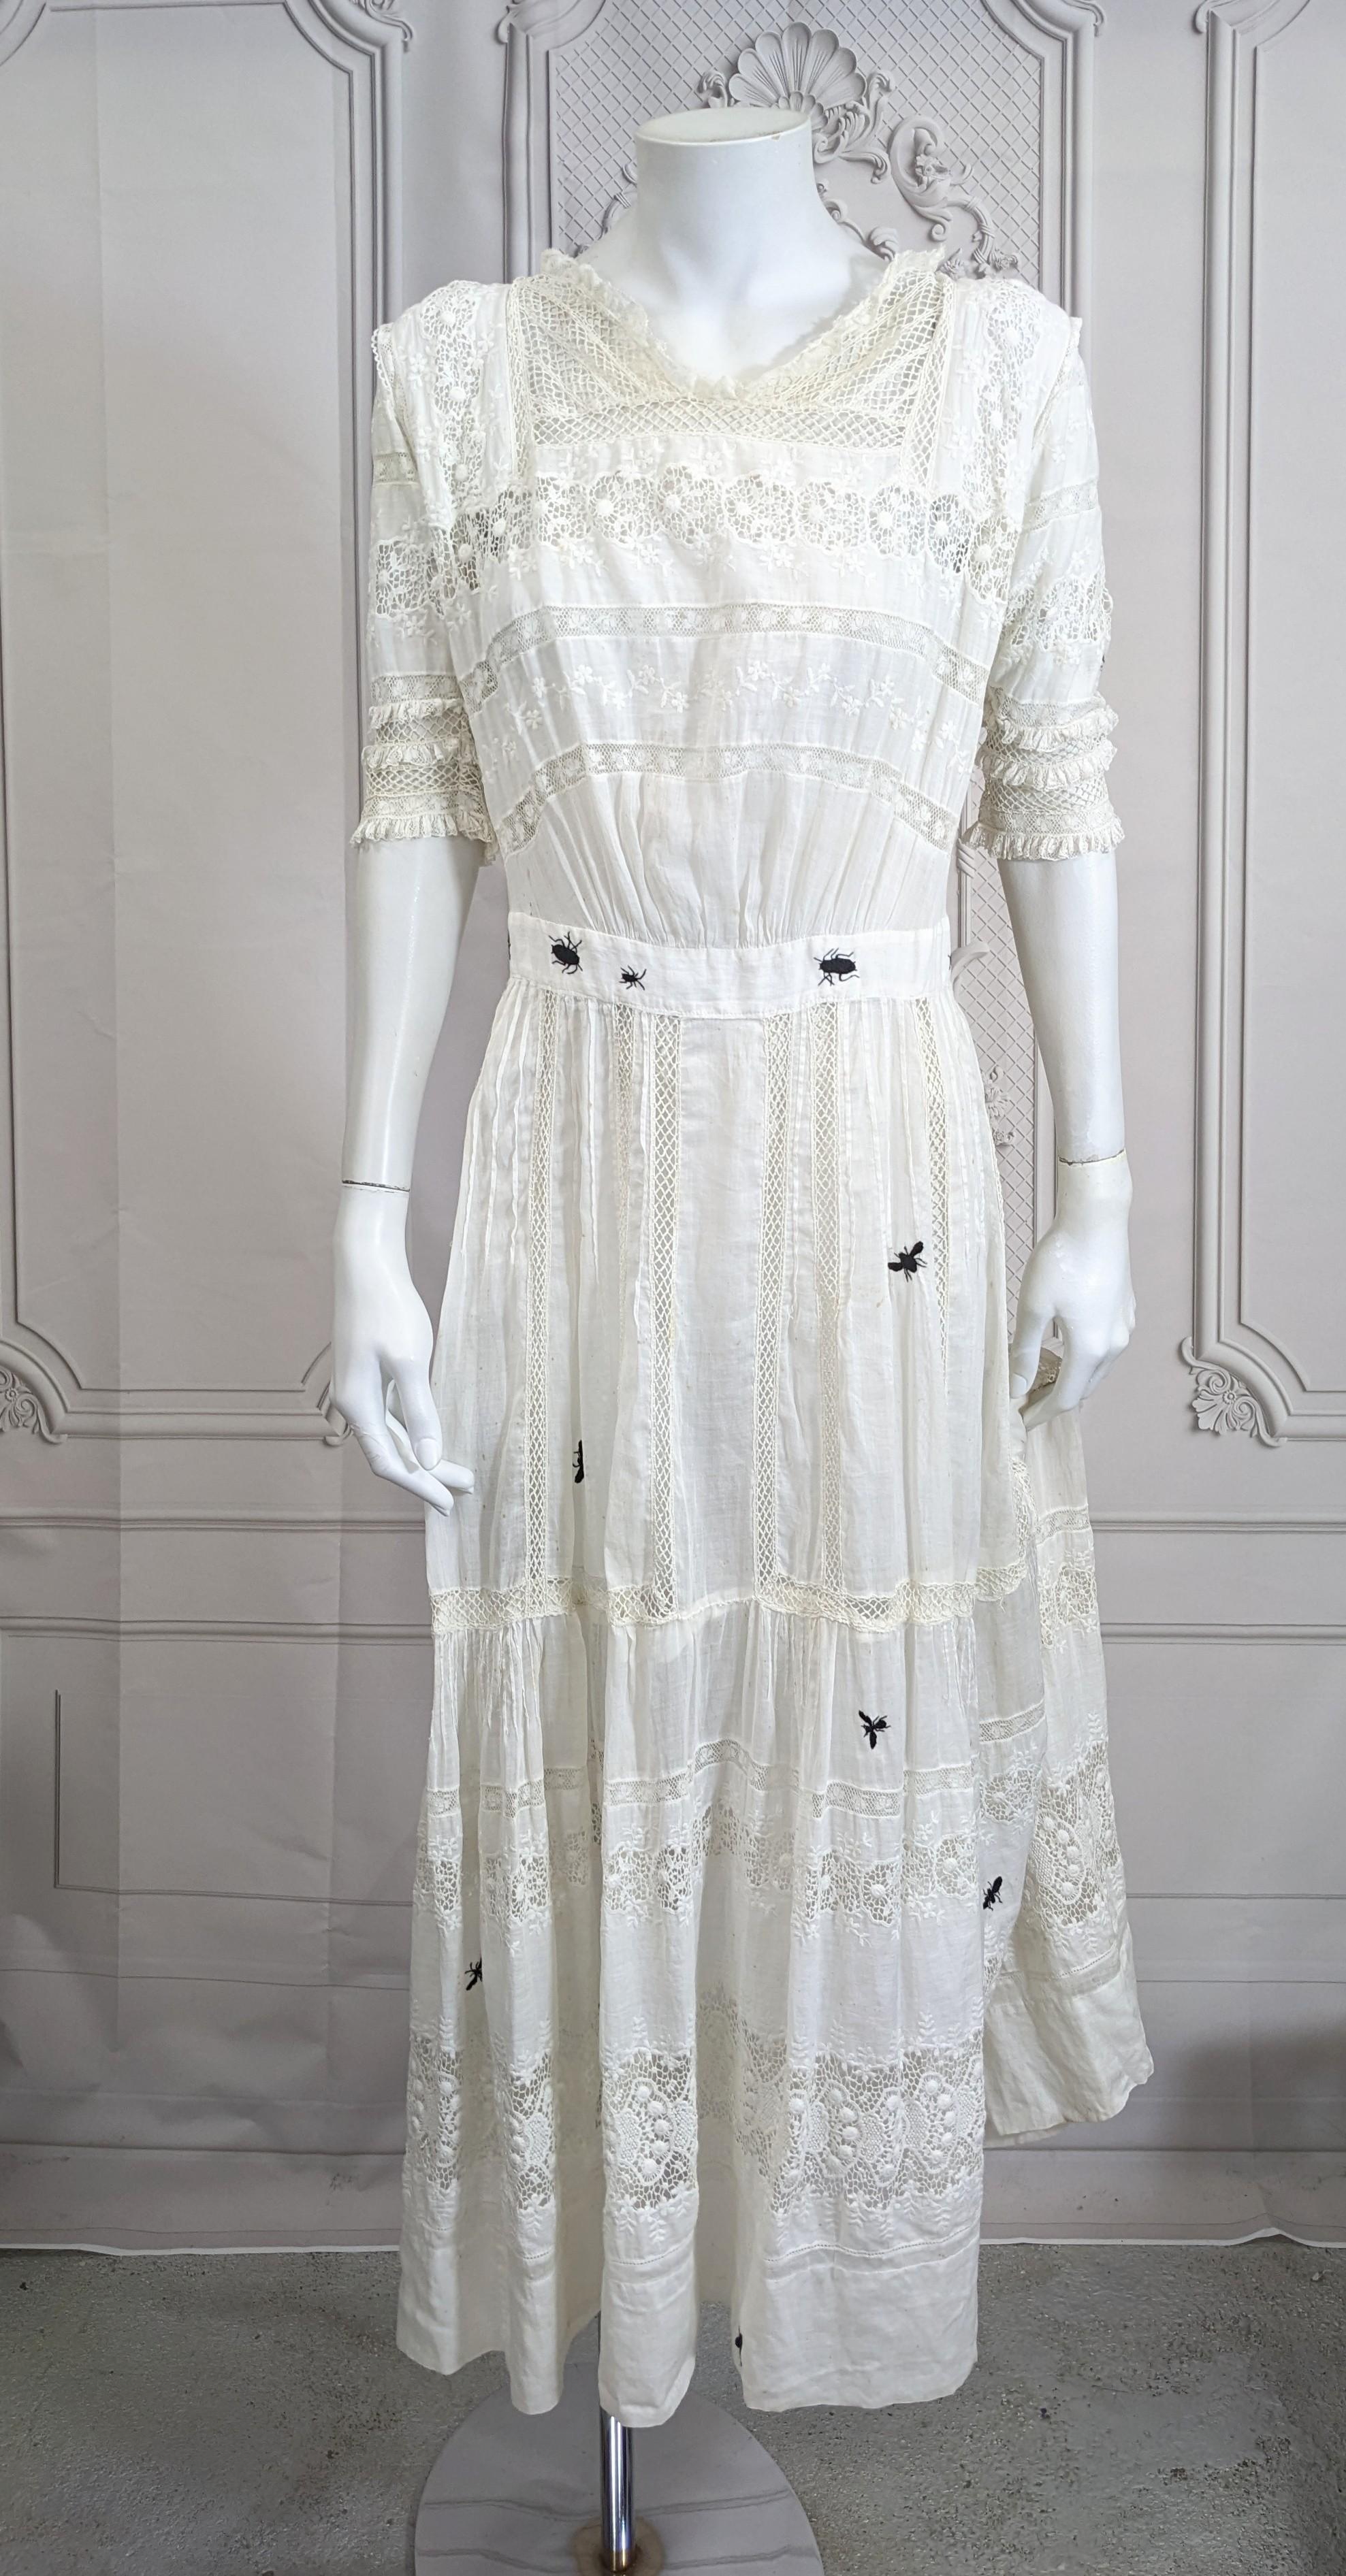 Victorian White Embroidered Dress, Upcycled Studio VL. One of a kind 19th Century cotton batiste dress inserted with different types of lace and then hand re-embroidered with creepy black insects of every variety throughout. Adorned with lace